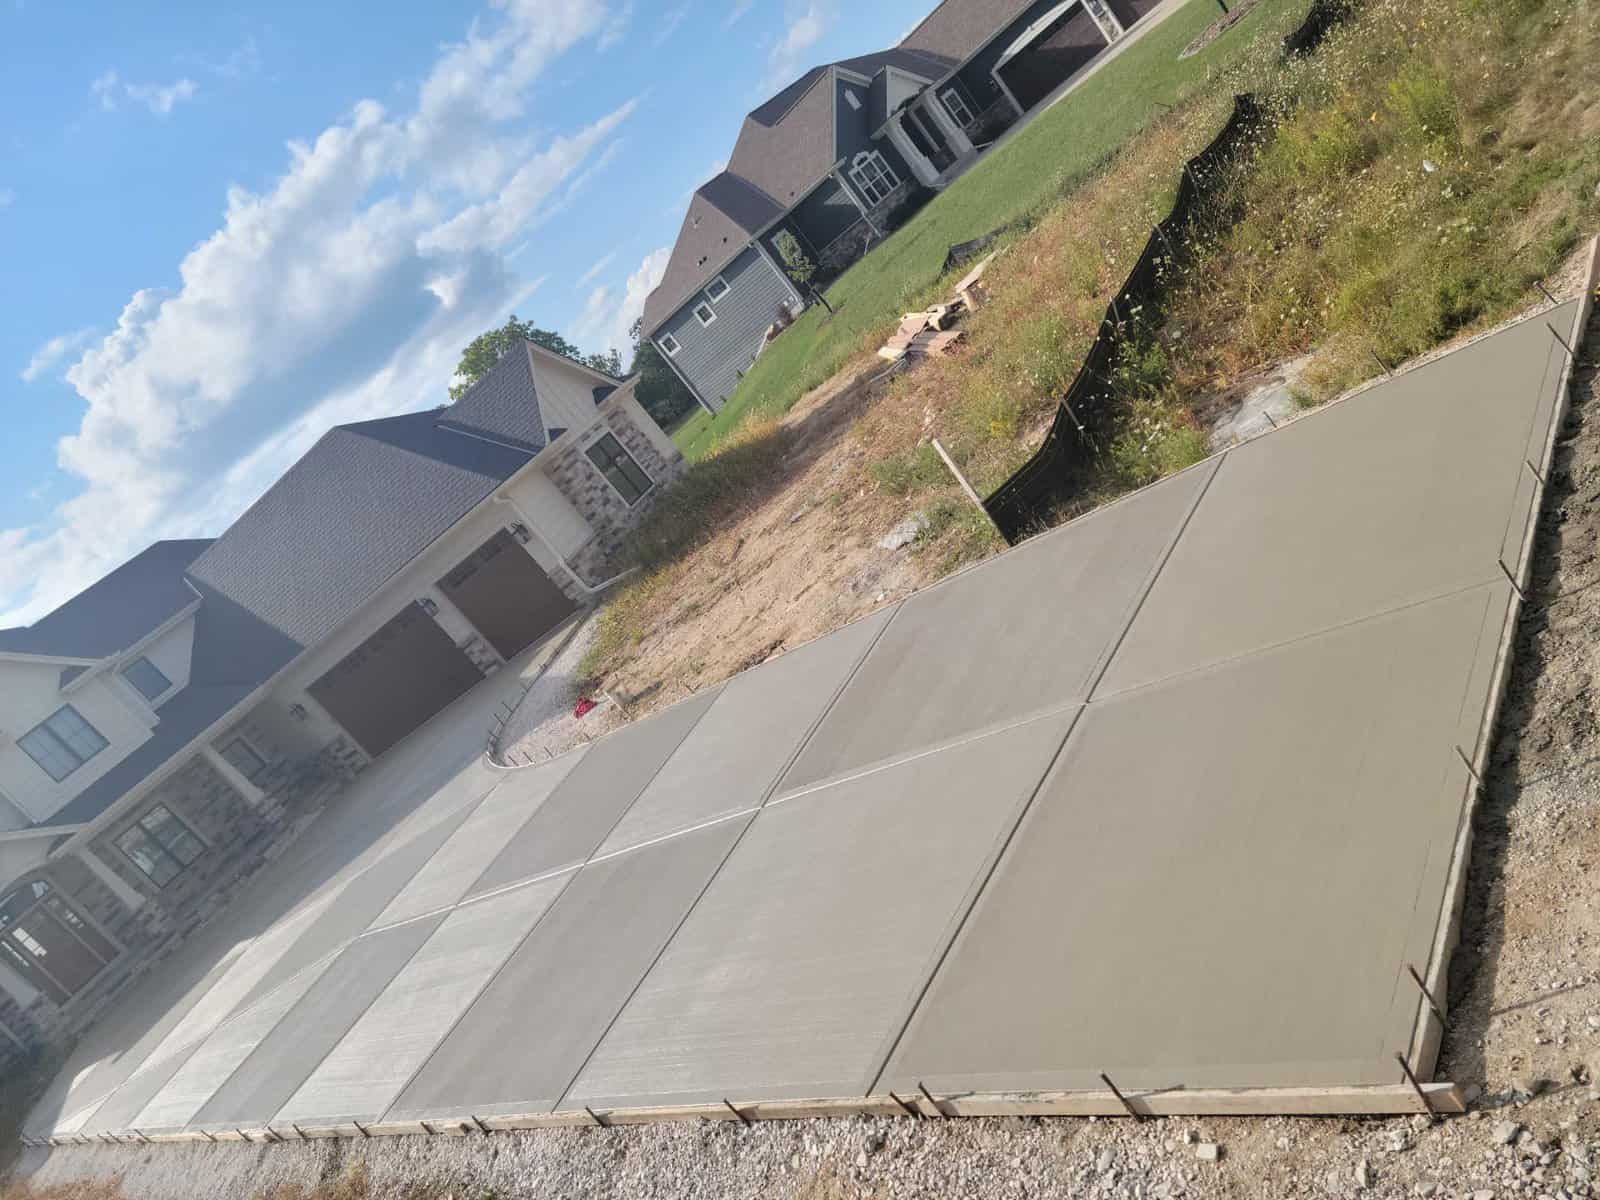 Newly poured residential concrete driveway with expansion joints, adjacent to a grassy area and in front of suburban homes under a clear sky.